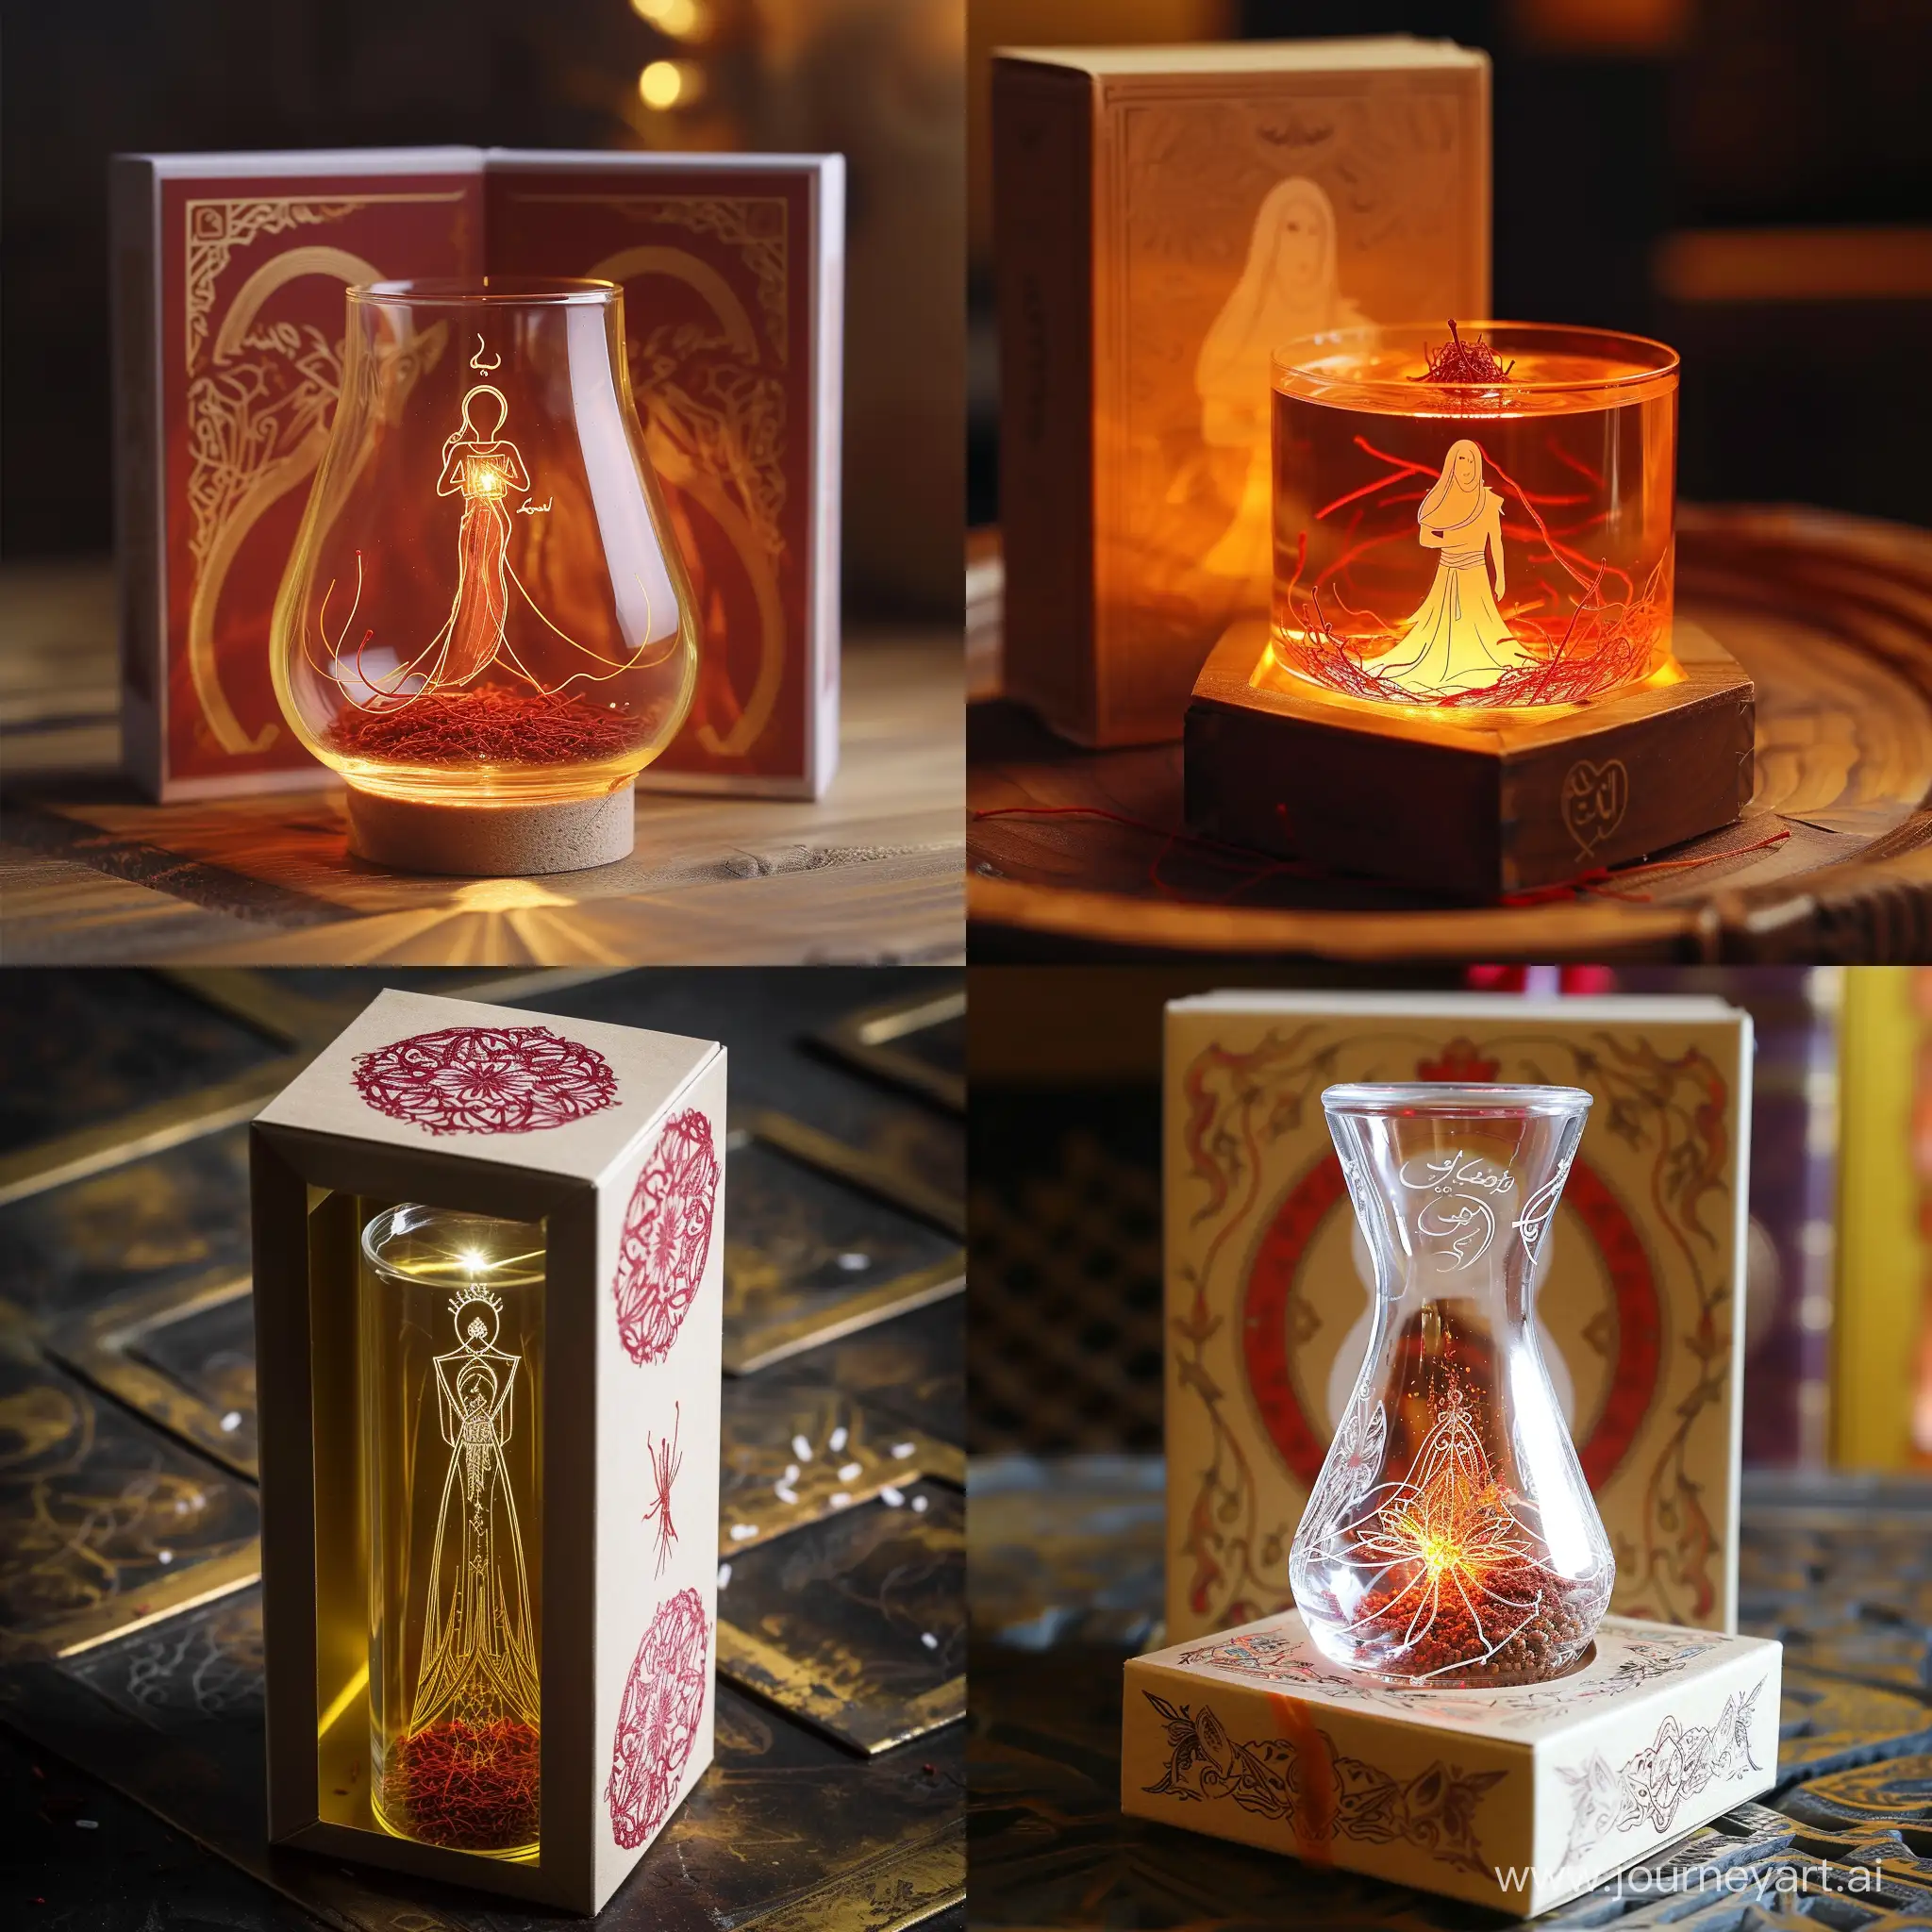 Exquisite-Prince-of-Persiathemed-Saffron-Packaging-with-Sufi-Symbol